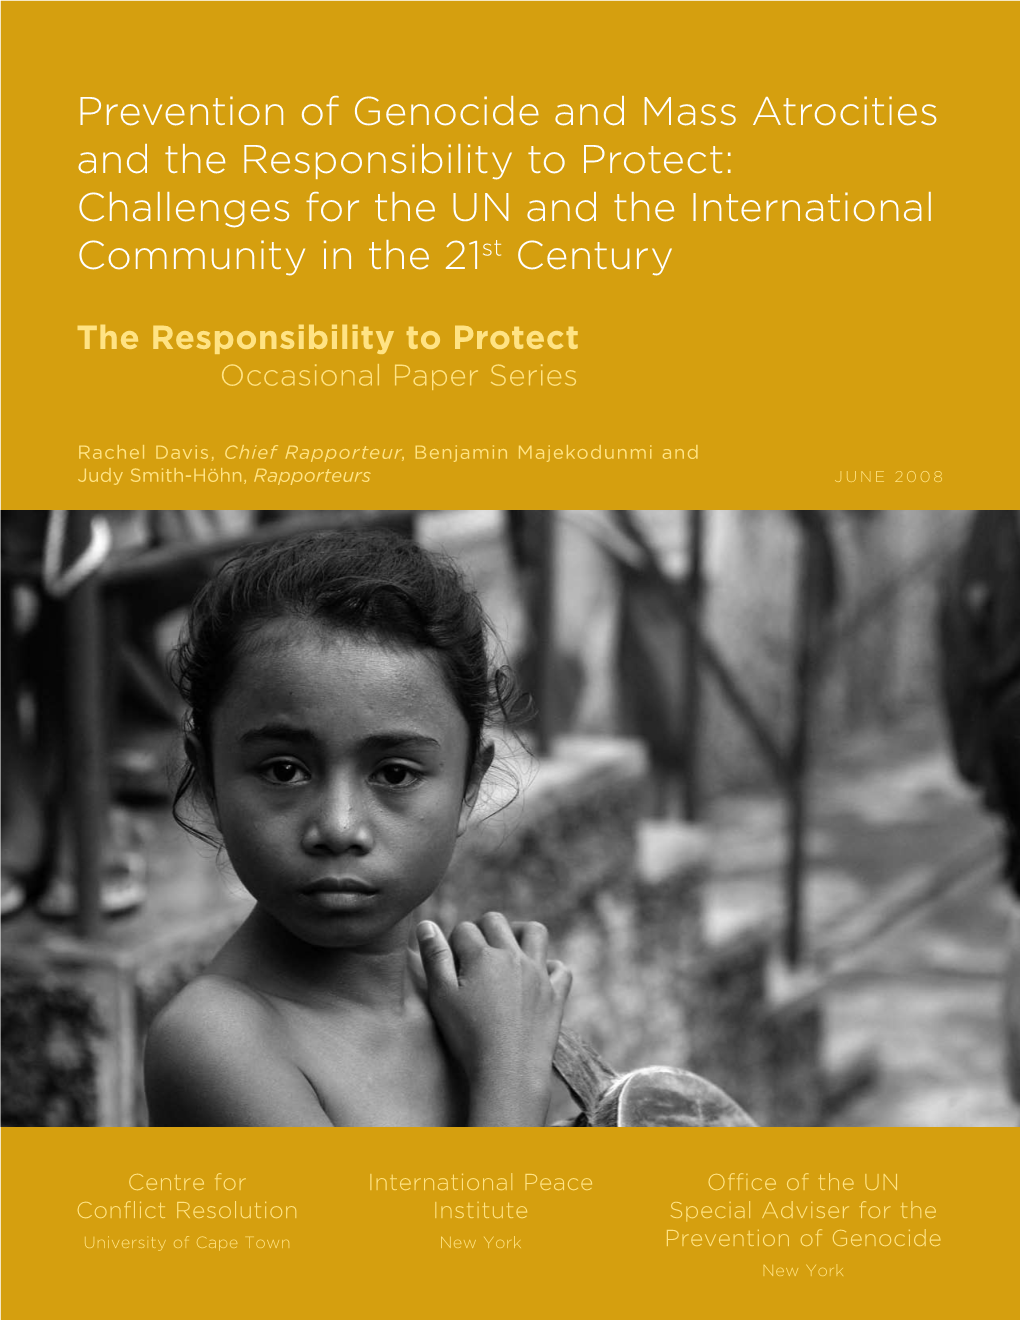 Prevention of Genocide and Mass Atrocities and the Responsibility to Protect: Challenges for the UN and the International Community in the 21St Century